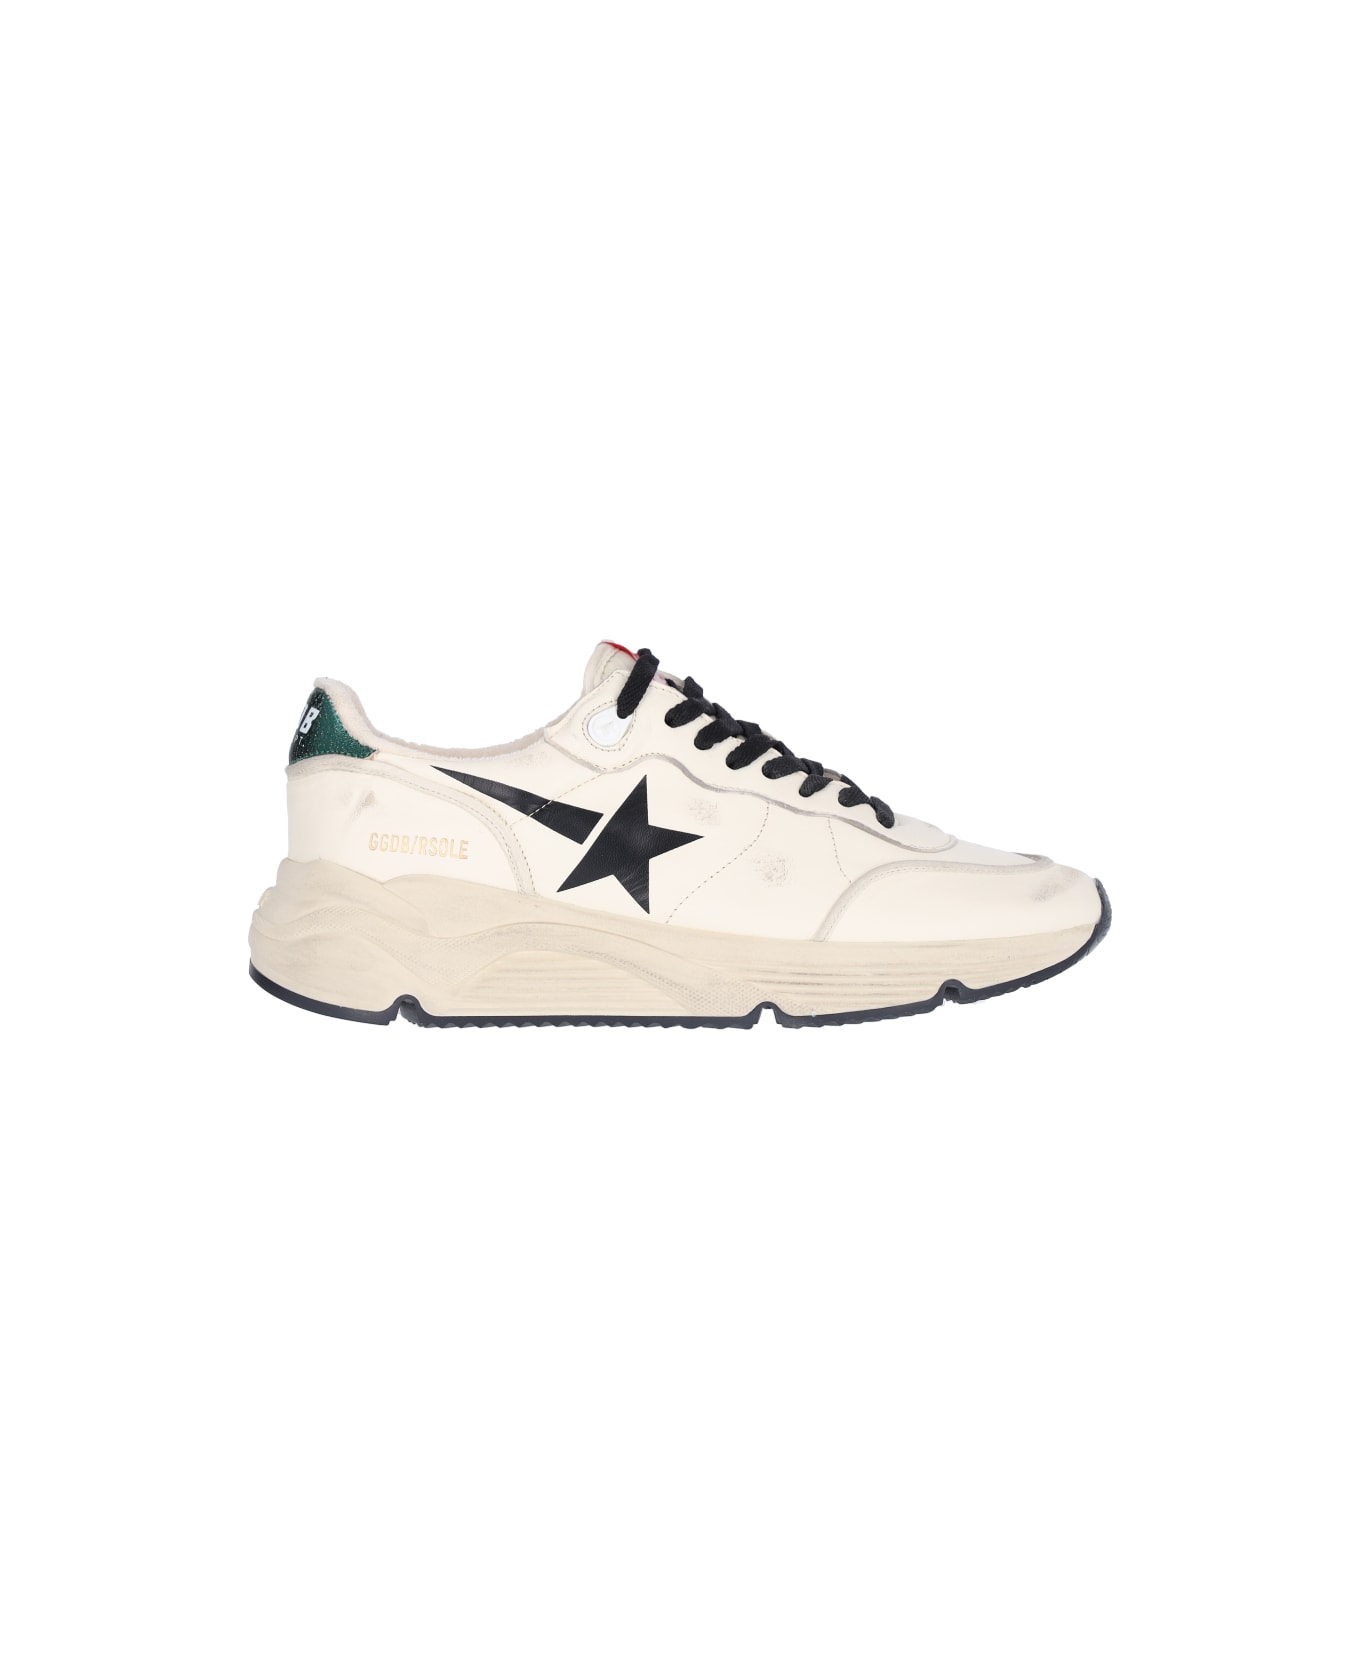 Golden Goose "running Sole" Sneakers - White